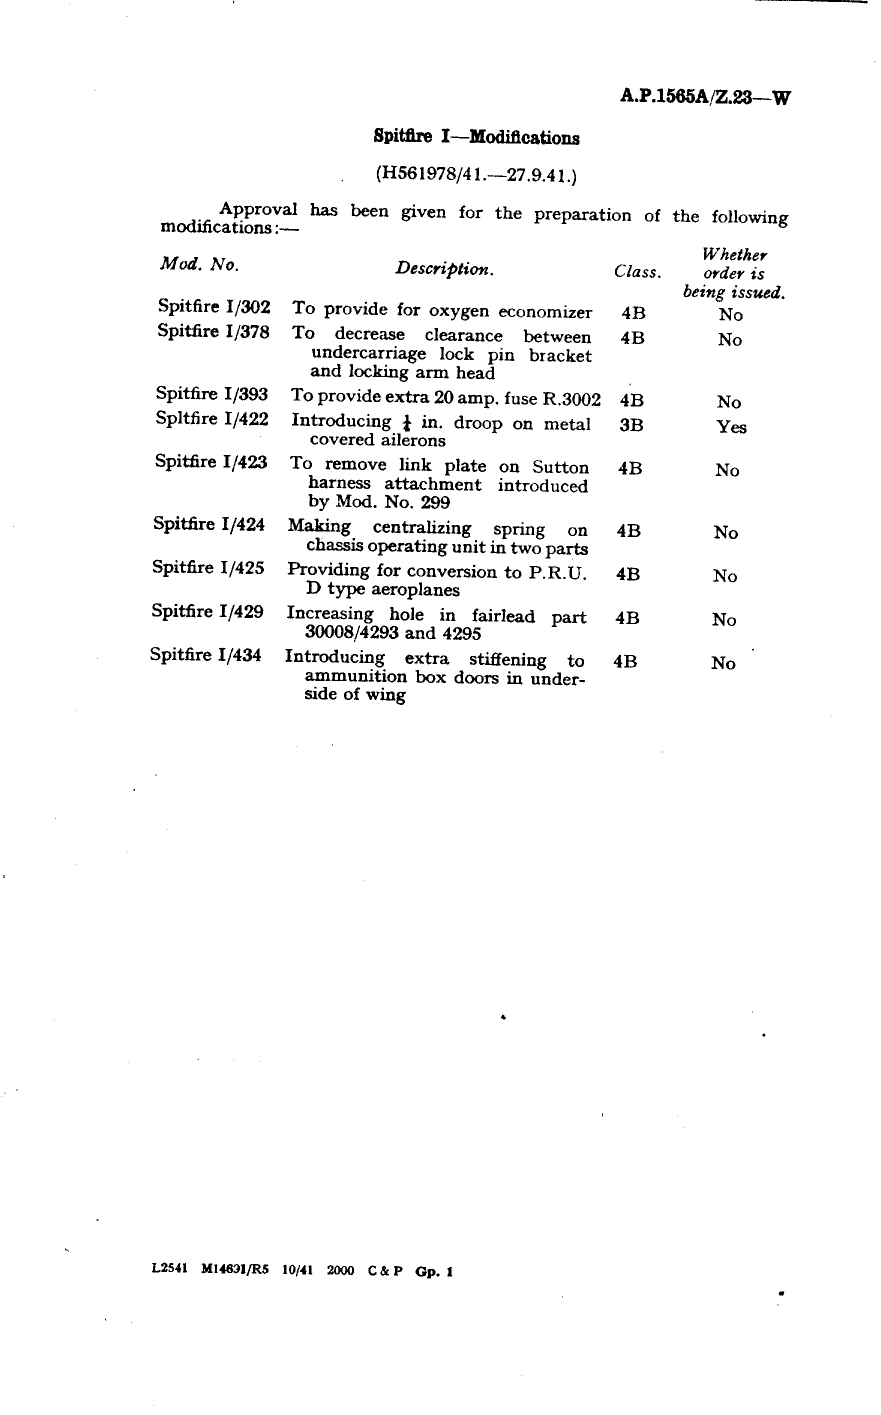 Sample page 1 from AirCorps Library document: Spitfire I Modifications 302, 378, 393, 422, 423, 424, 425, 429 and 434